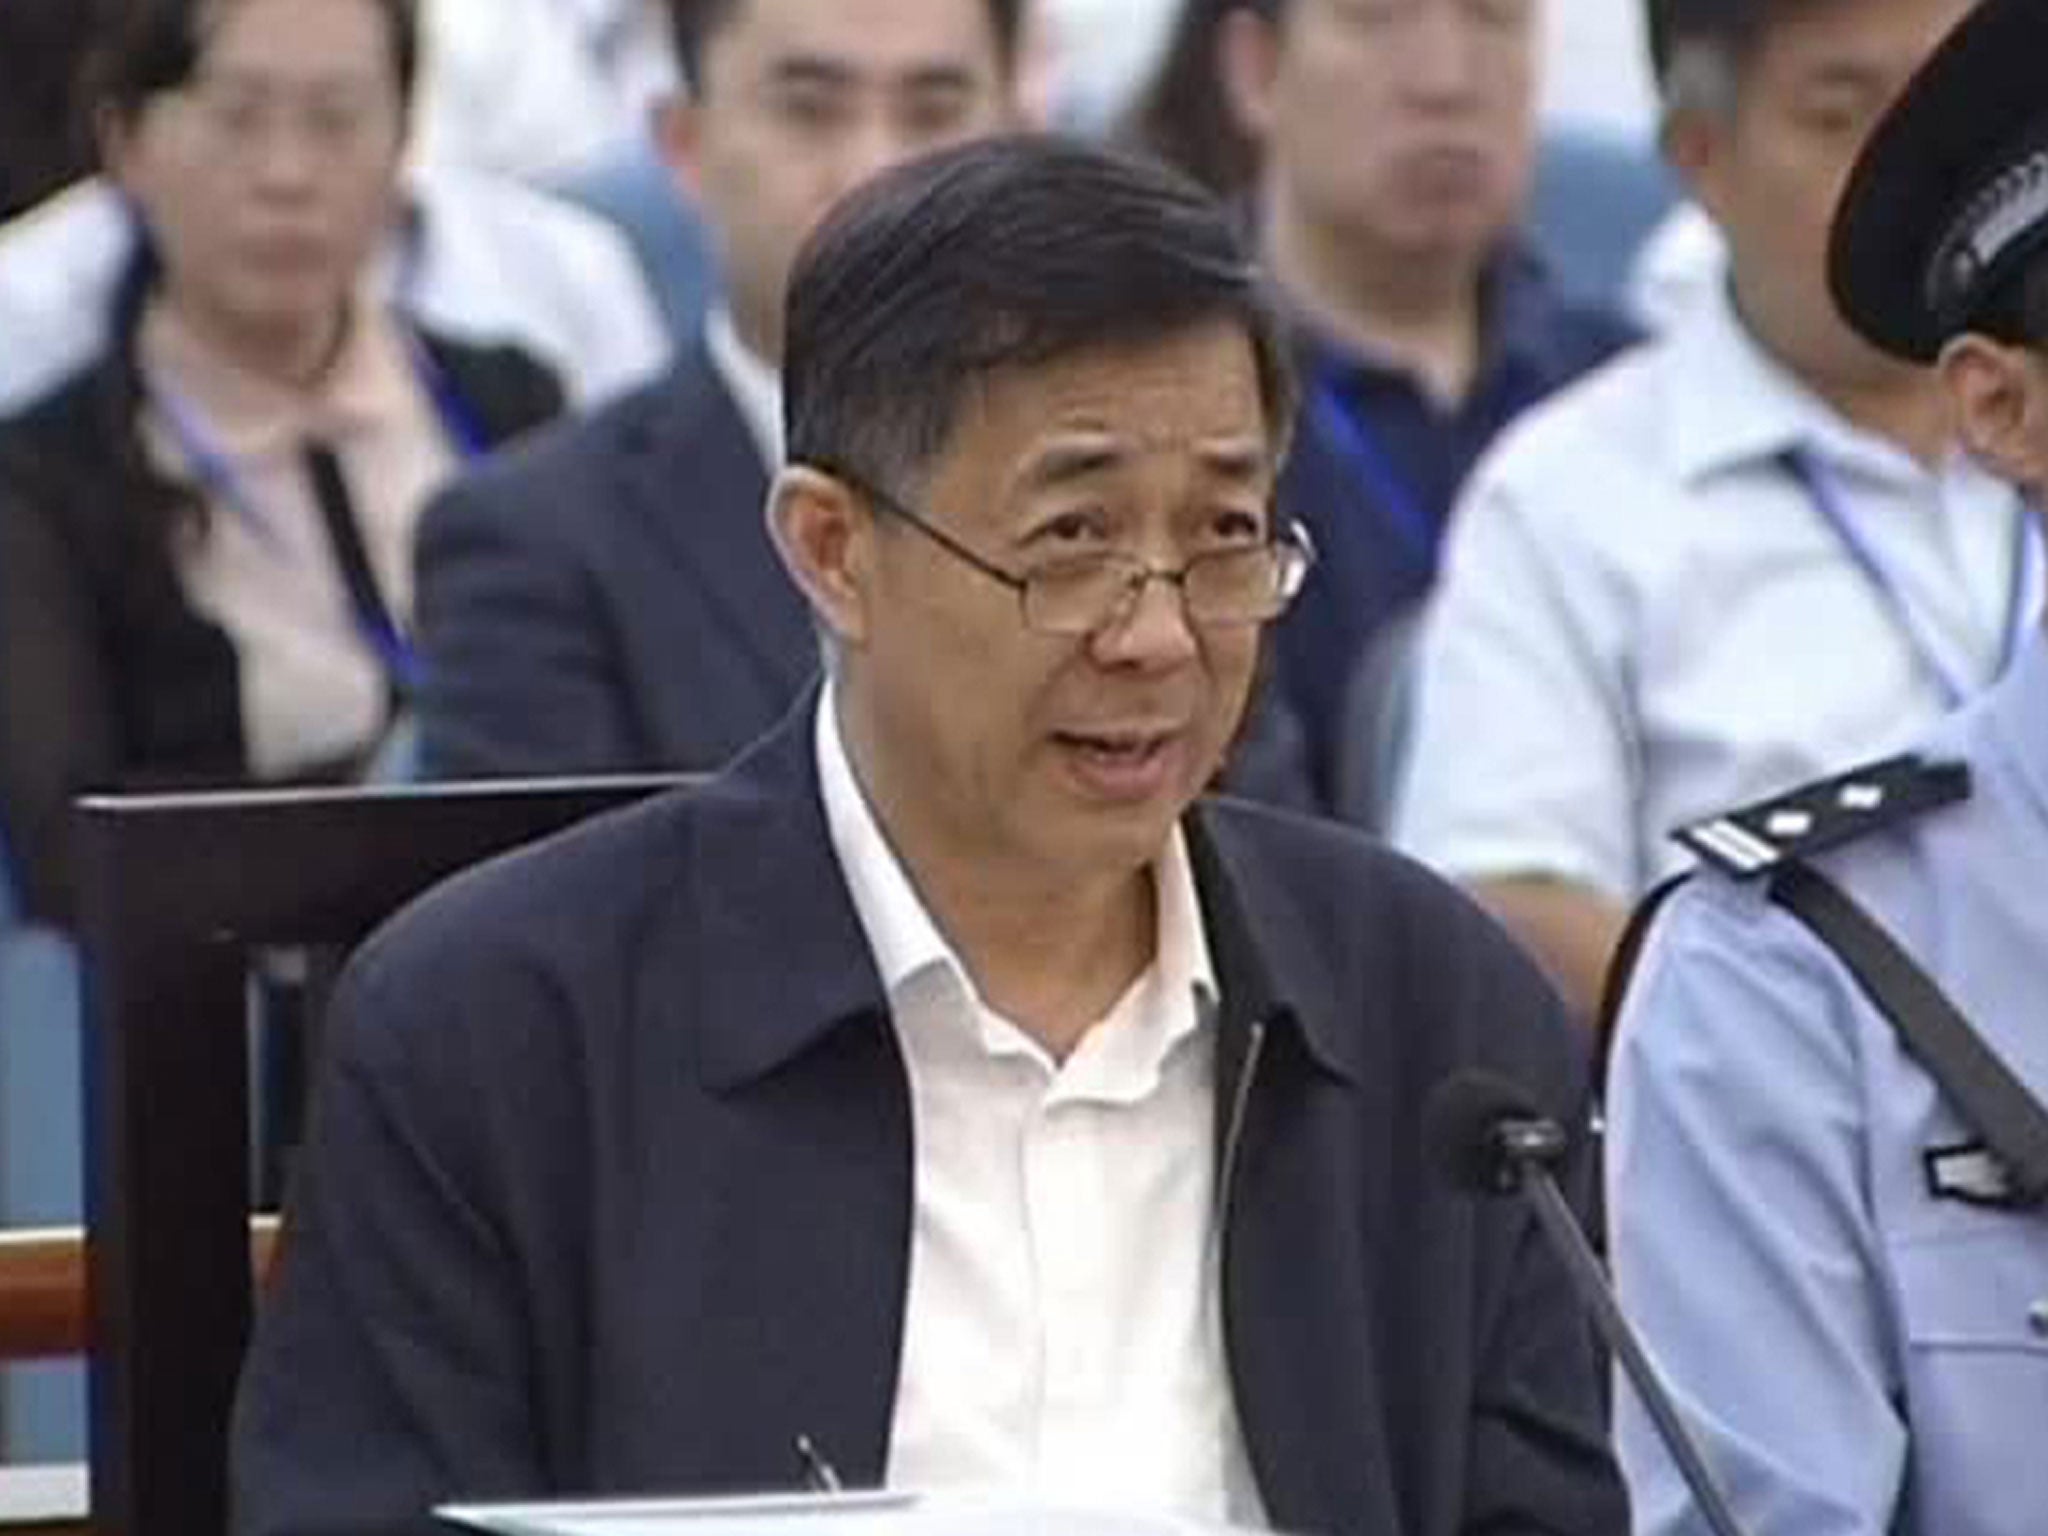 Ousted senior Chinese politician Bo Xilai speaks during his trial in Jinan, Shandong province